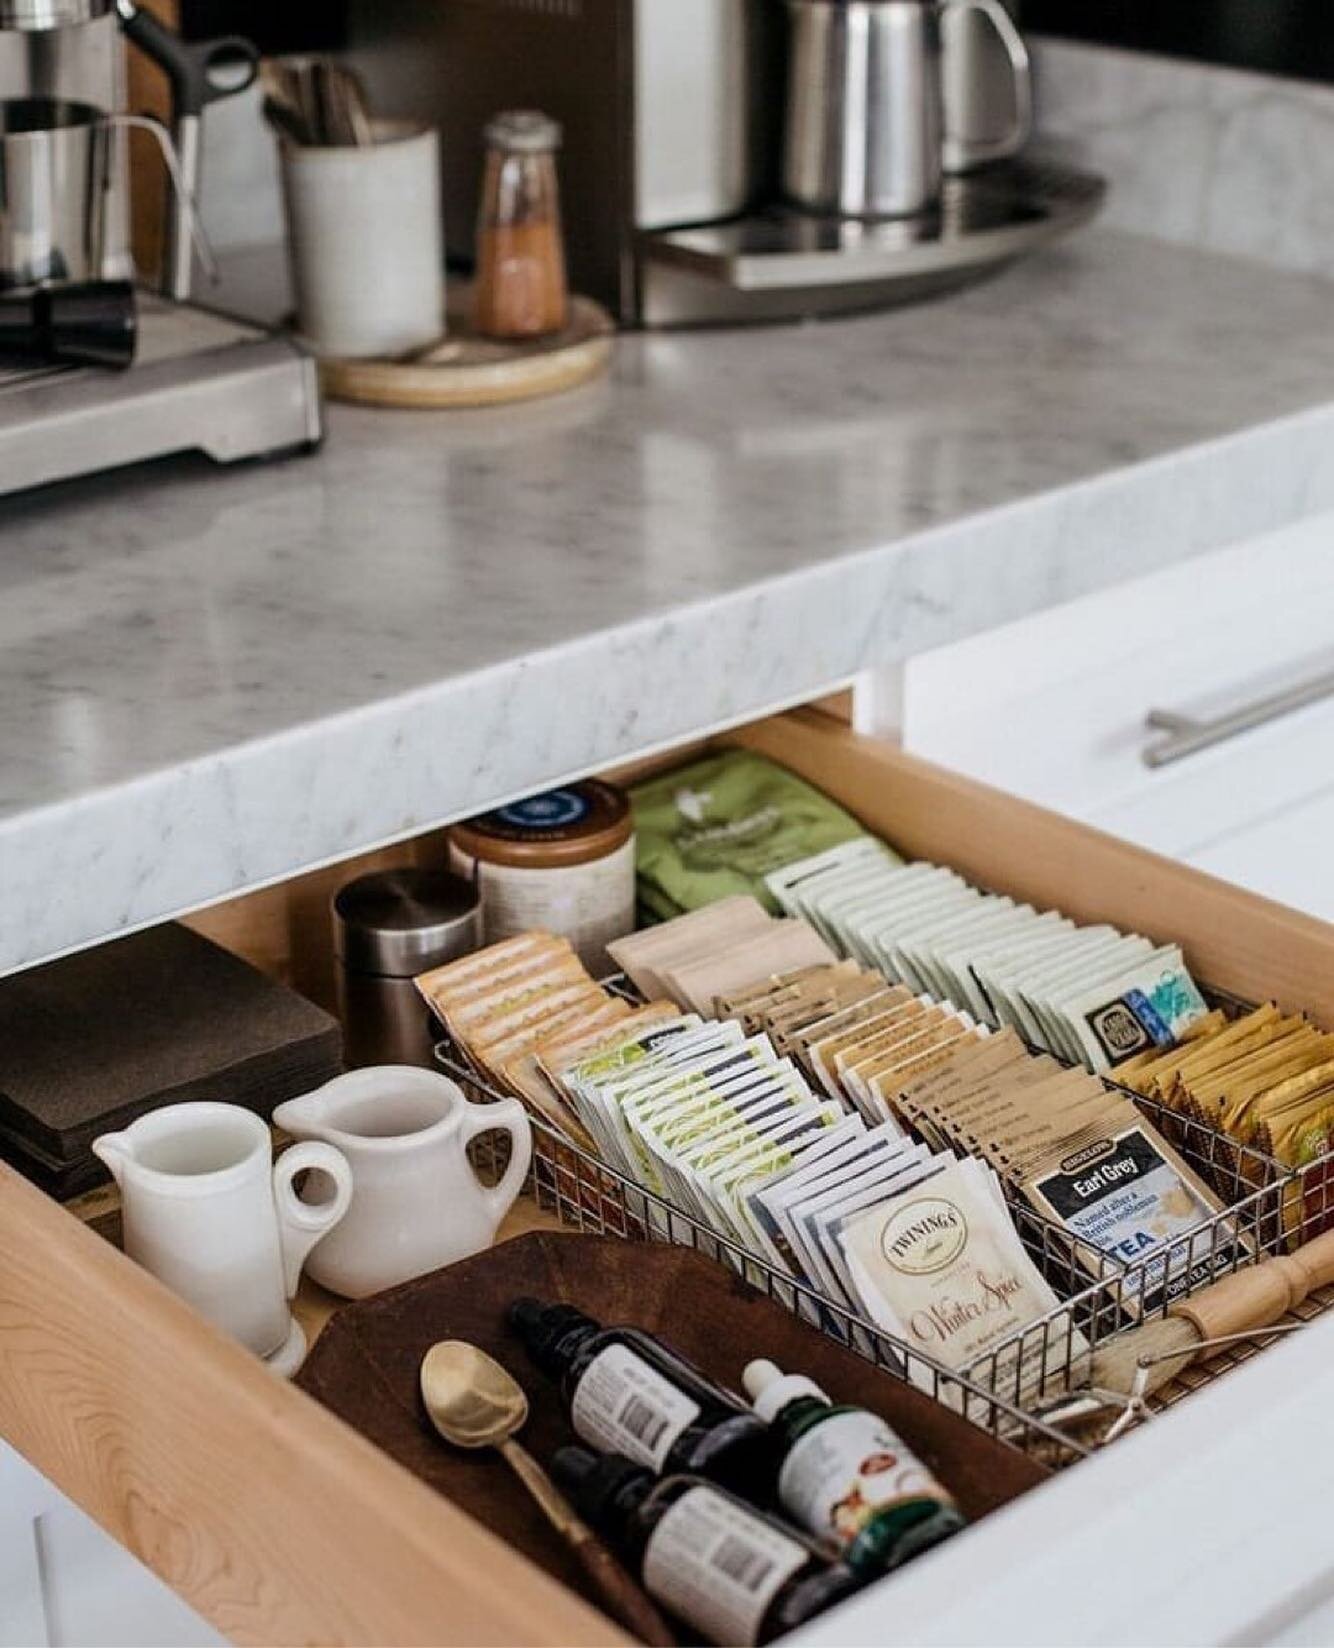 A little organization makes your daily ritual that much more relaxing ✨ Just imagine what a fully organized home can do!  Get organized today 🌿
.⁠
.
📸 Pinterest
.
.⁠
.⁠
#detailedspaces #professionalorganizing #homedecorating #homedecor #houstontx #